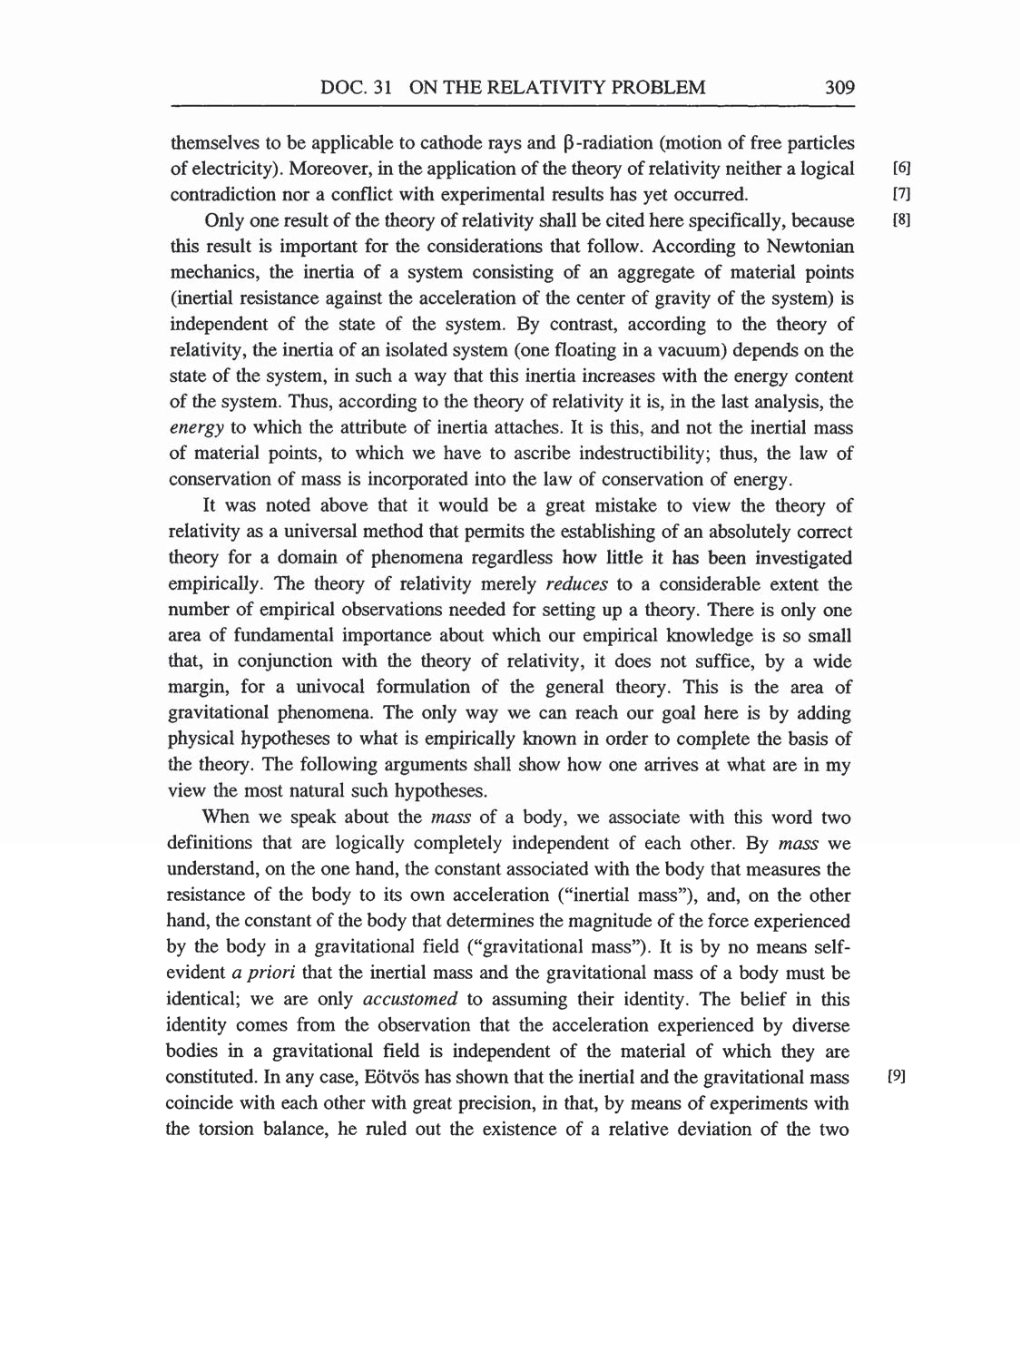 Volume 4: The Swiss Years: Writings 1912-1914 (English translation supplement) page 309